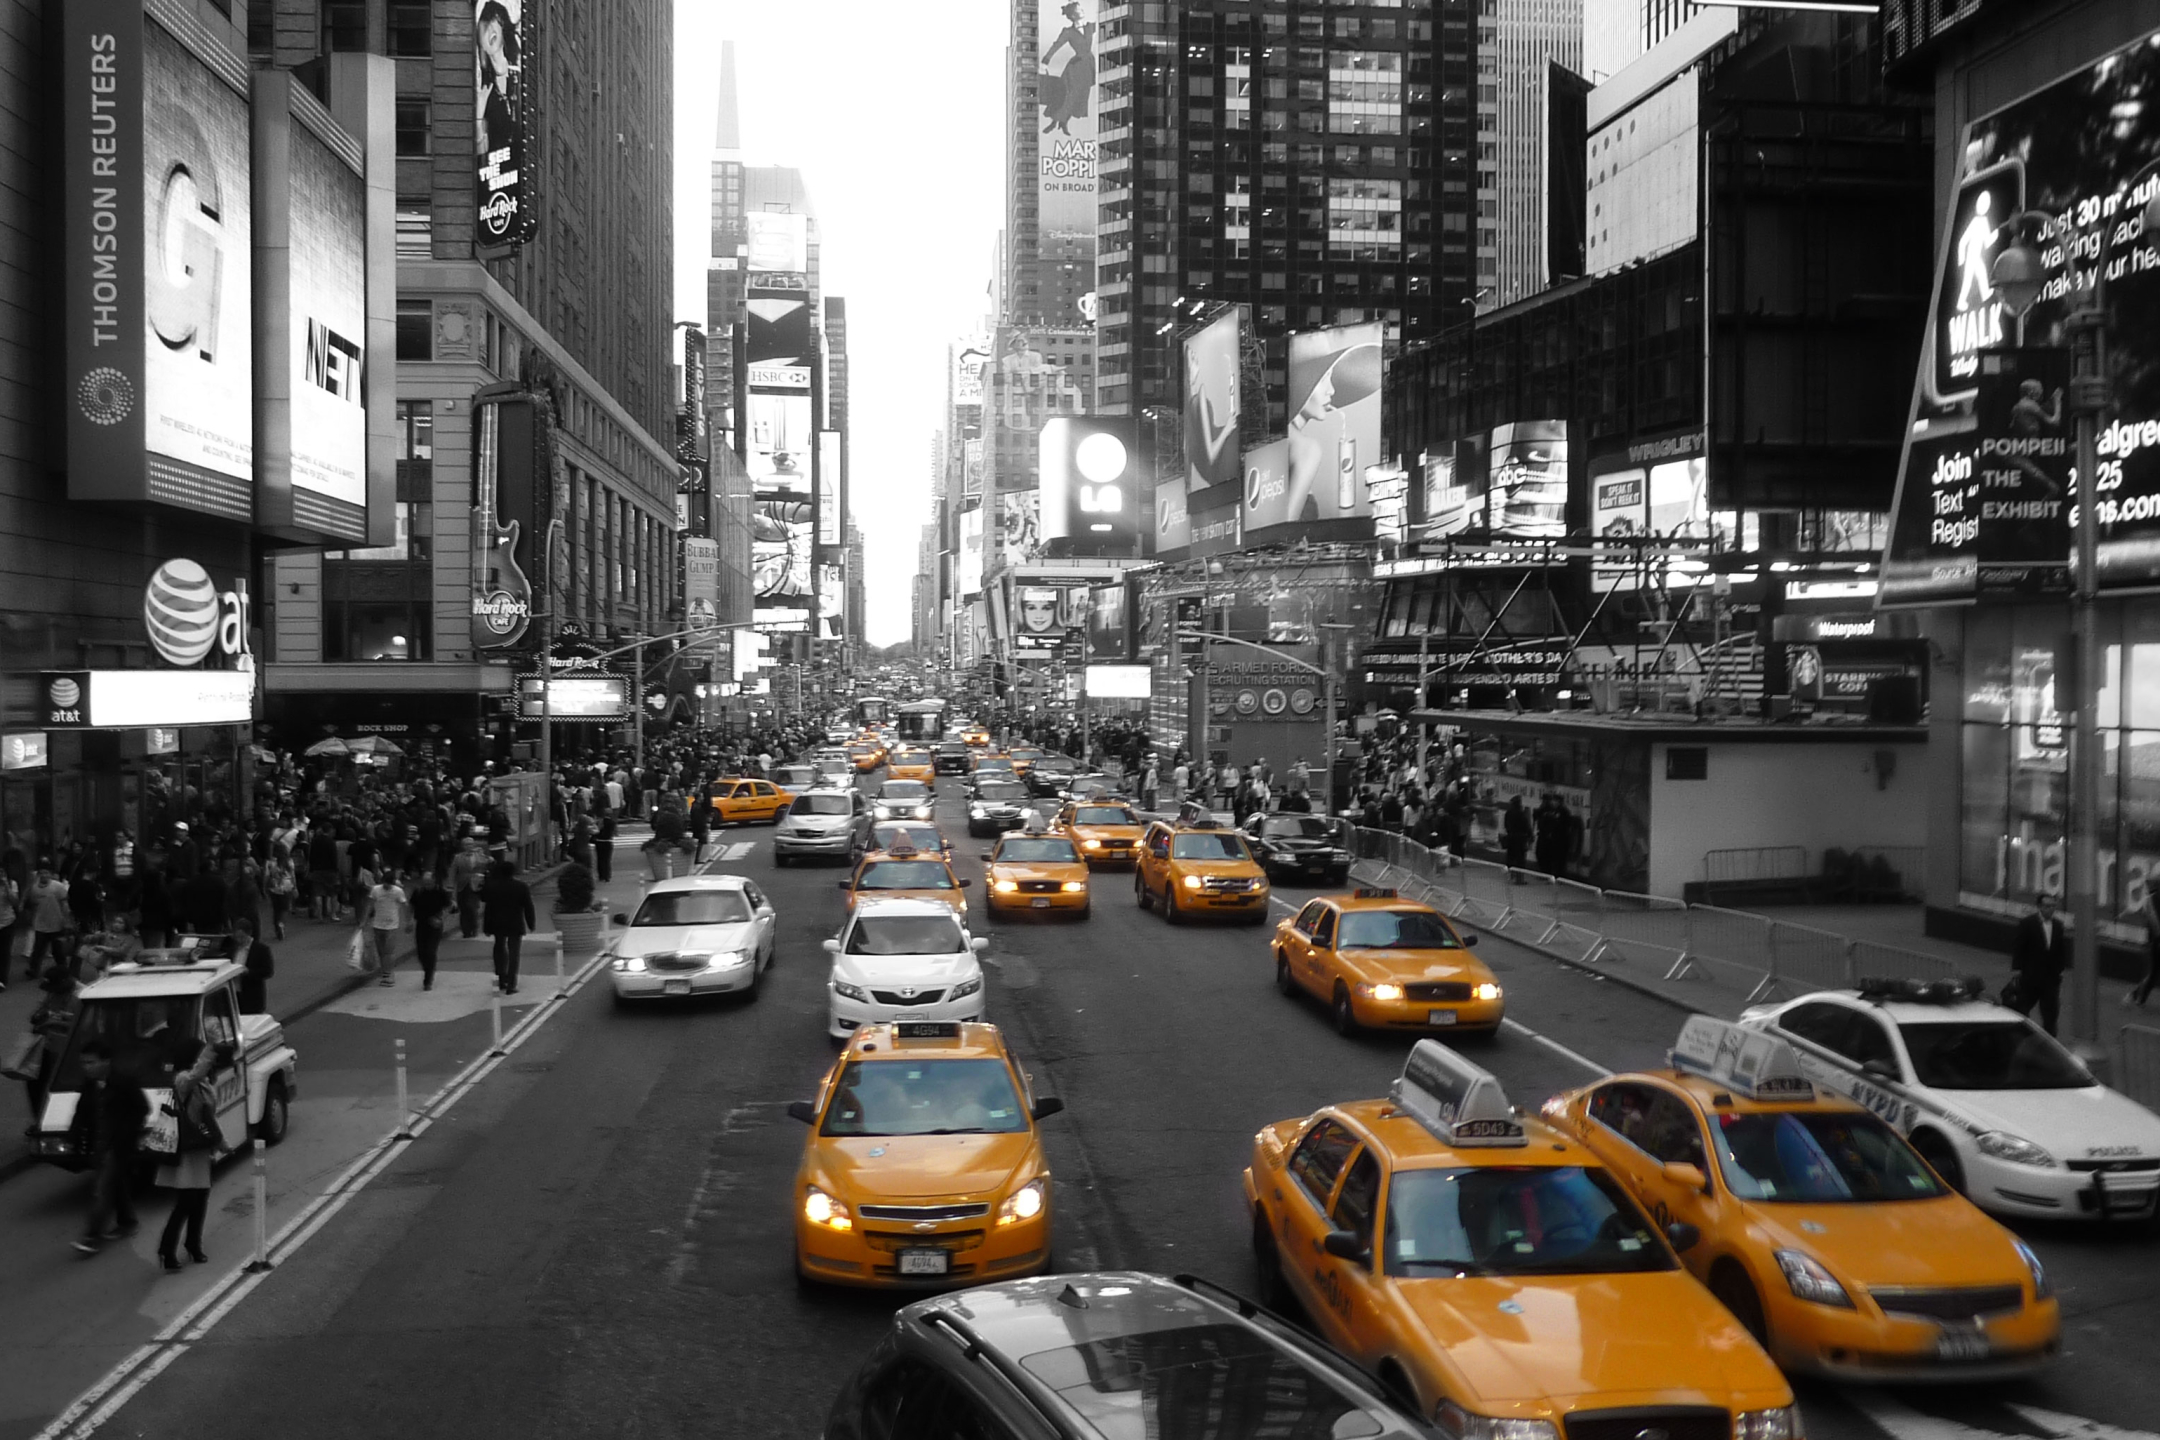 man made, new york, city, selective color, traffic, cities